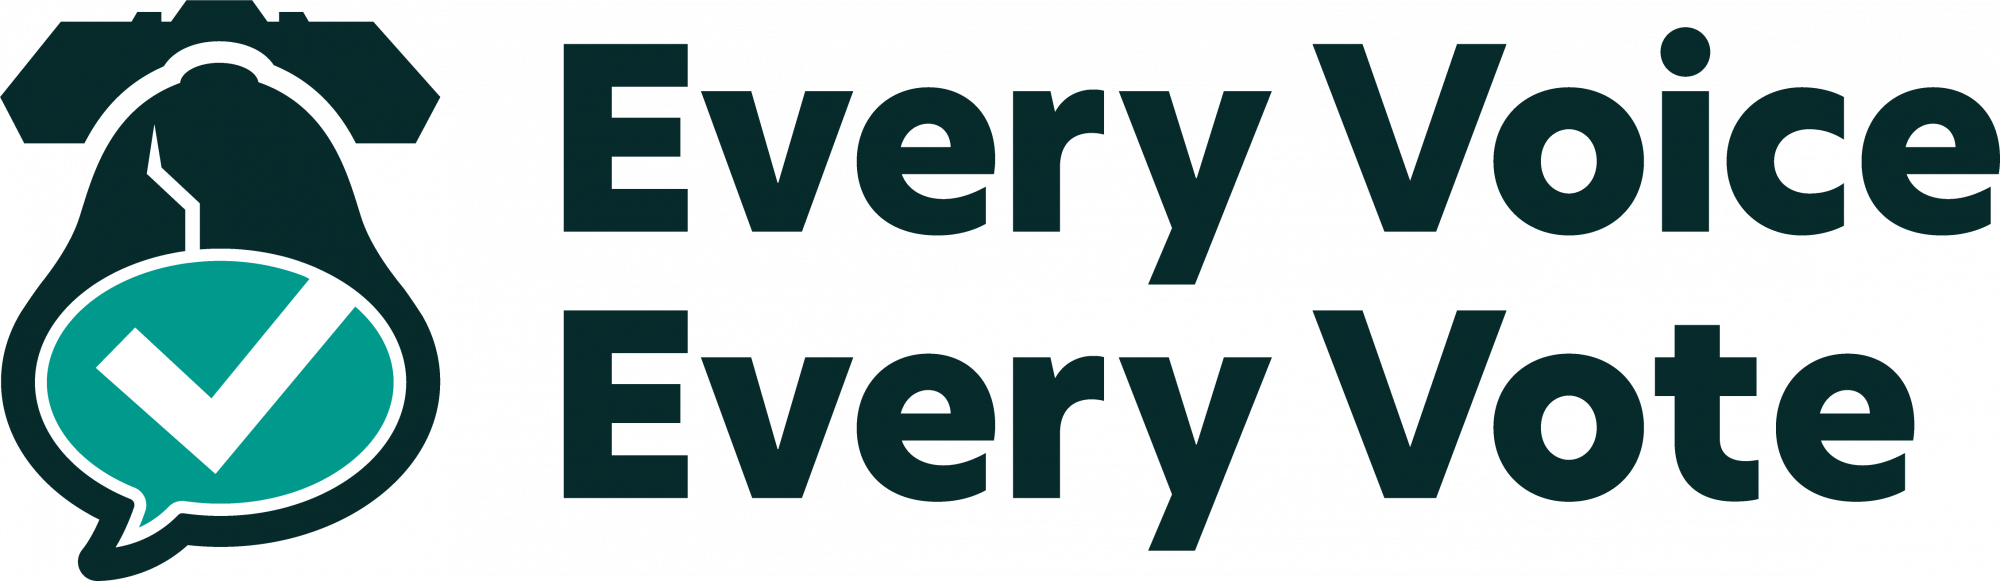 EveryVoiceEveryVote_logo_fullcolor_with_no_exclusionzone_HighRes_RGB (1).png